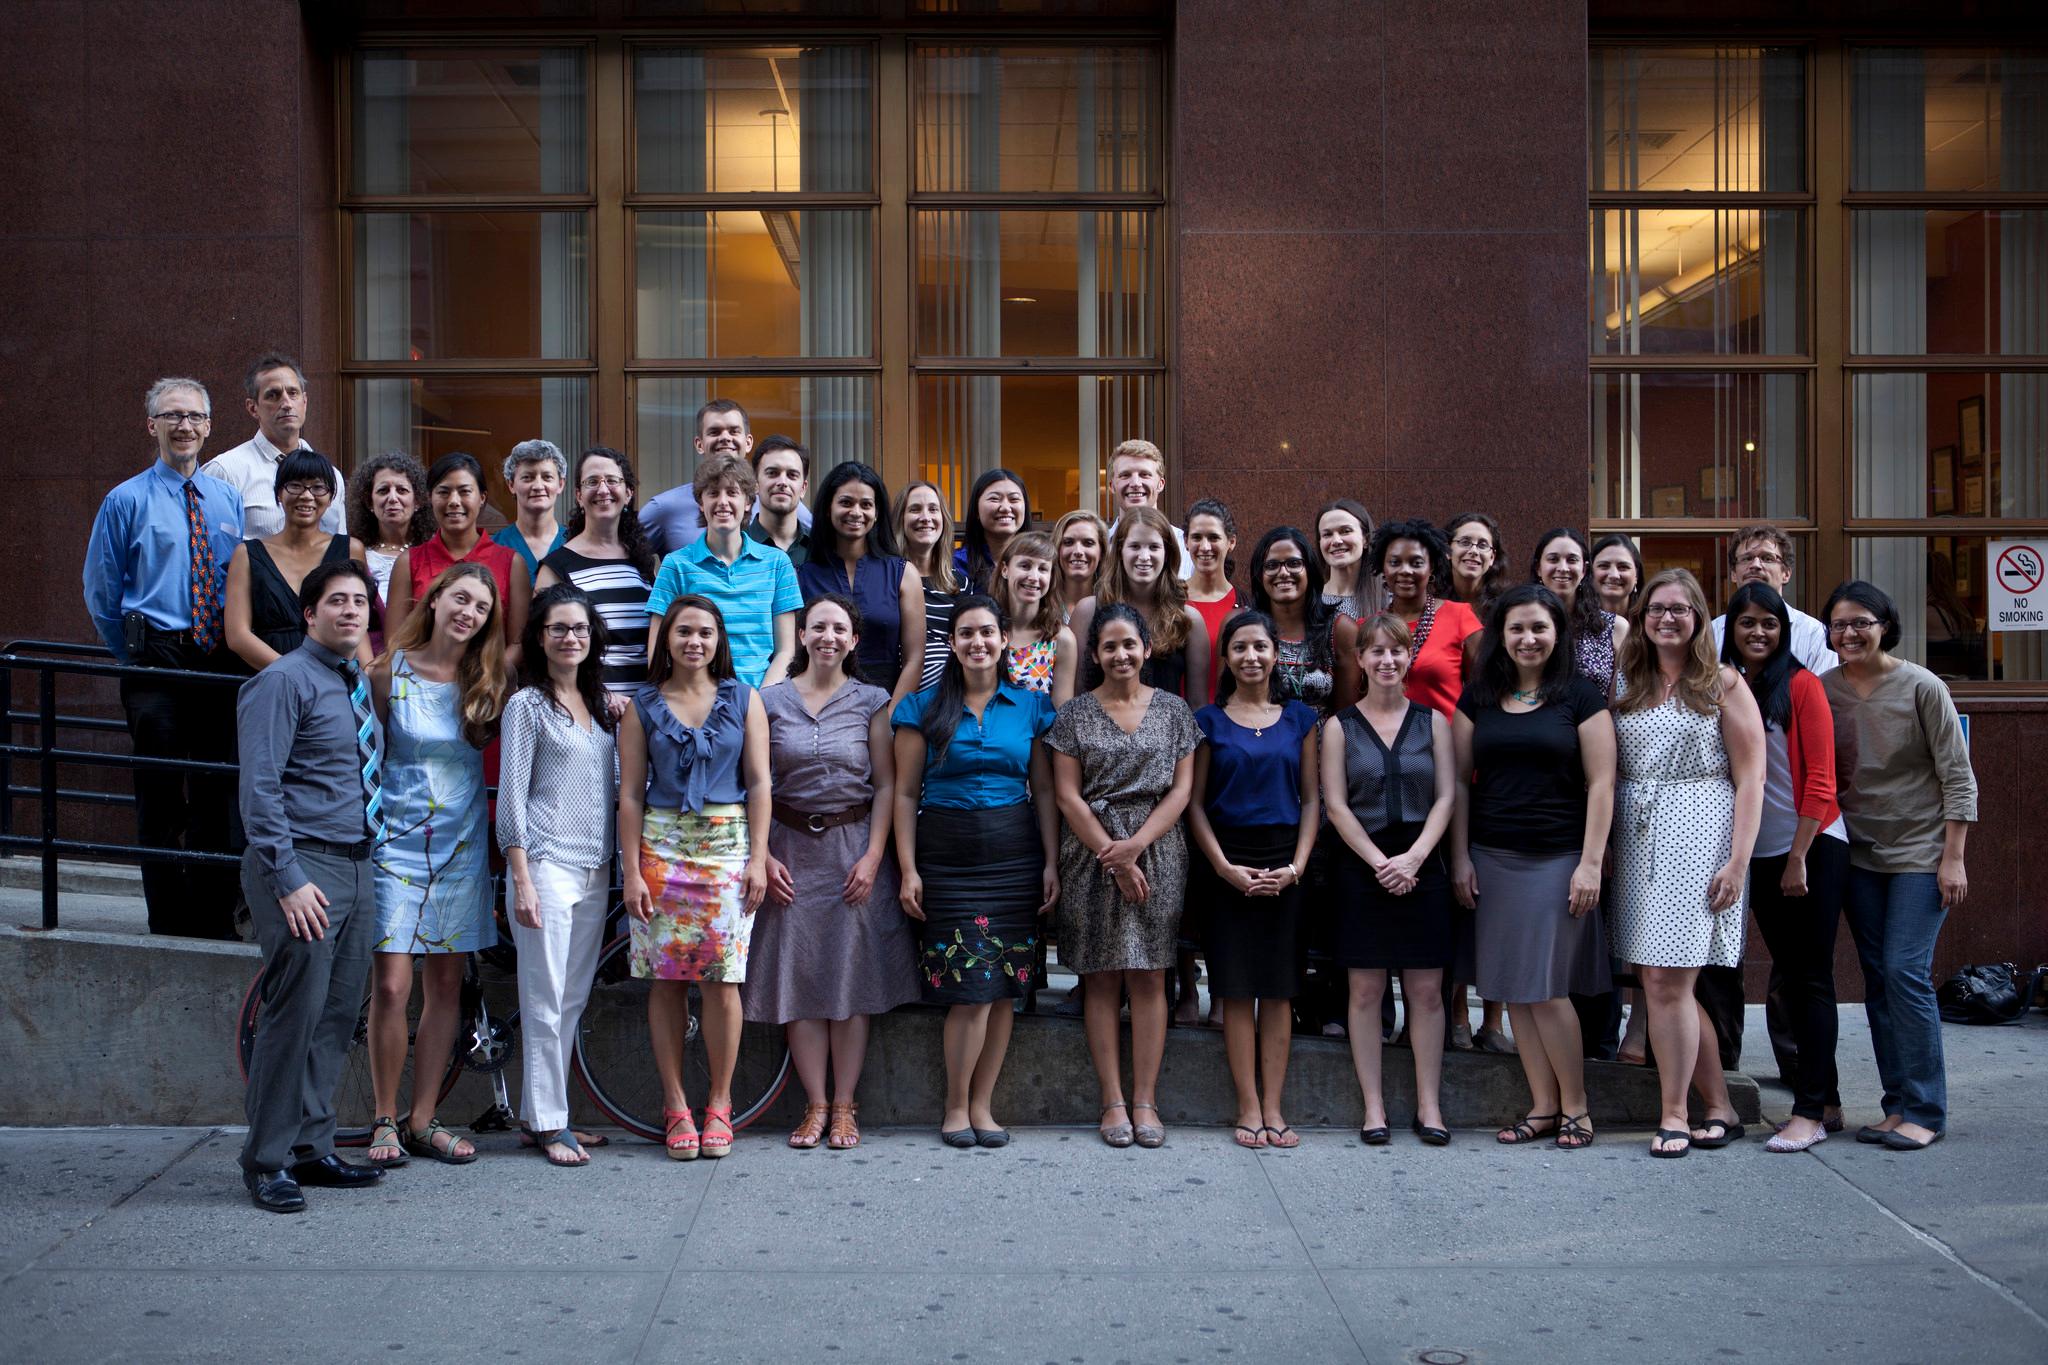 Welcome to the Institute, Class of 2019 Residents!